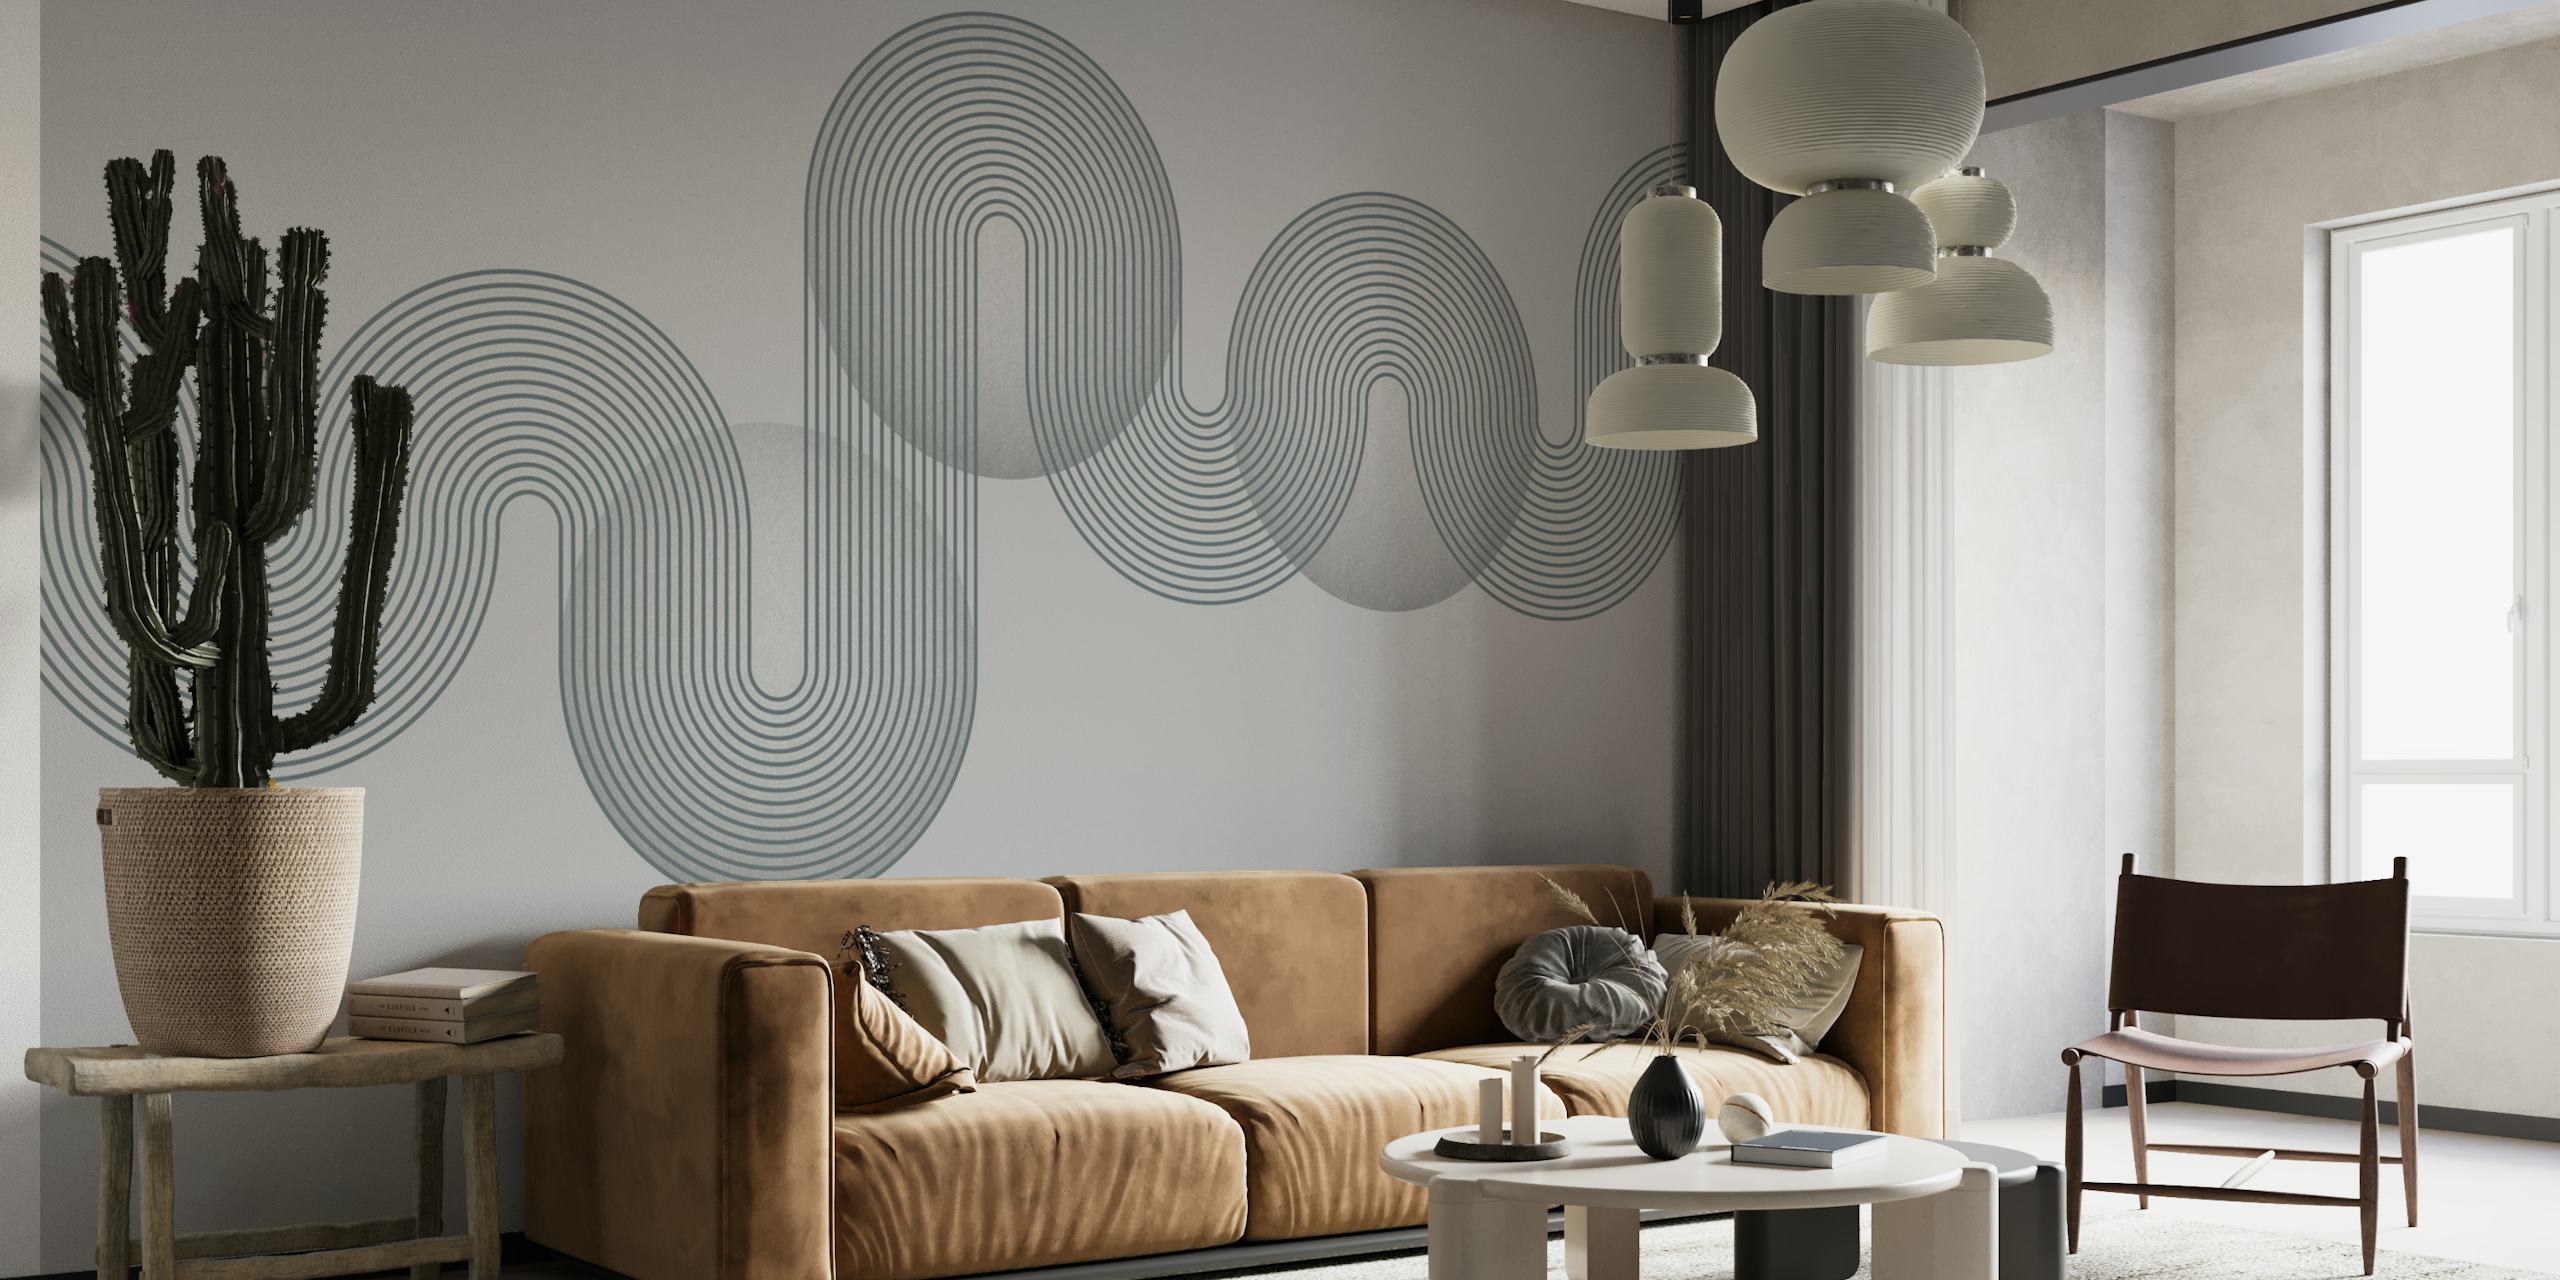 Grey Bauhaus Minimalist wall mural with abstract geometric shapes